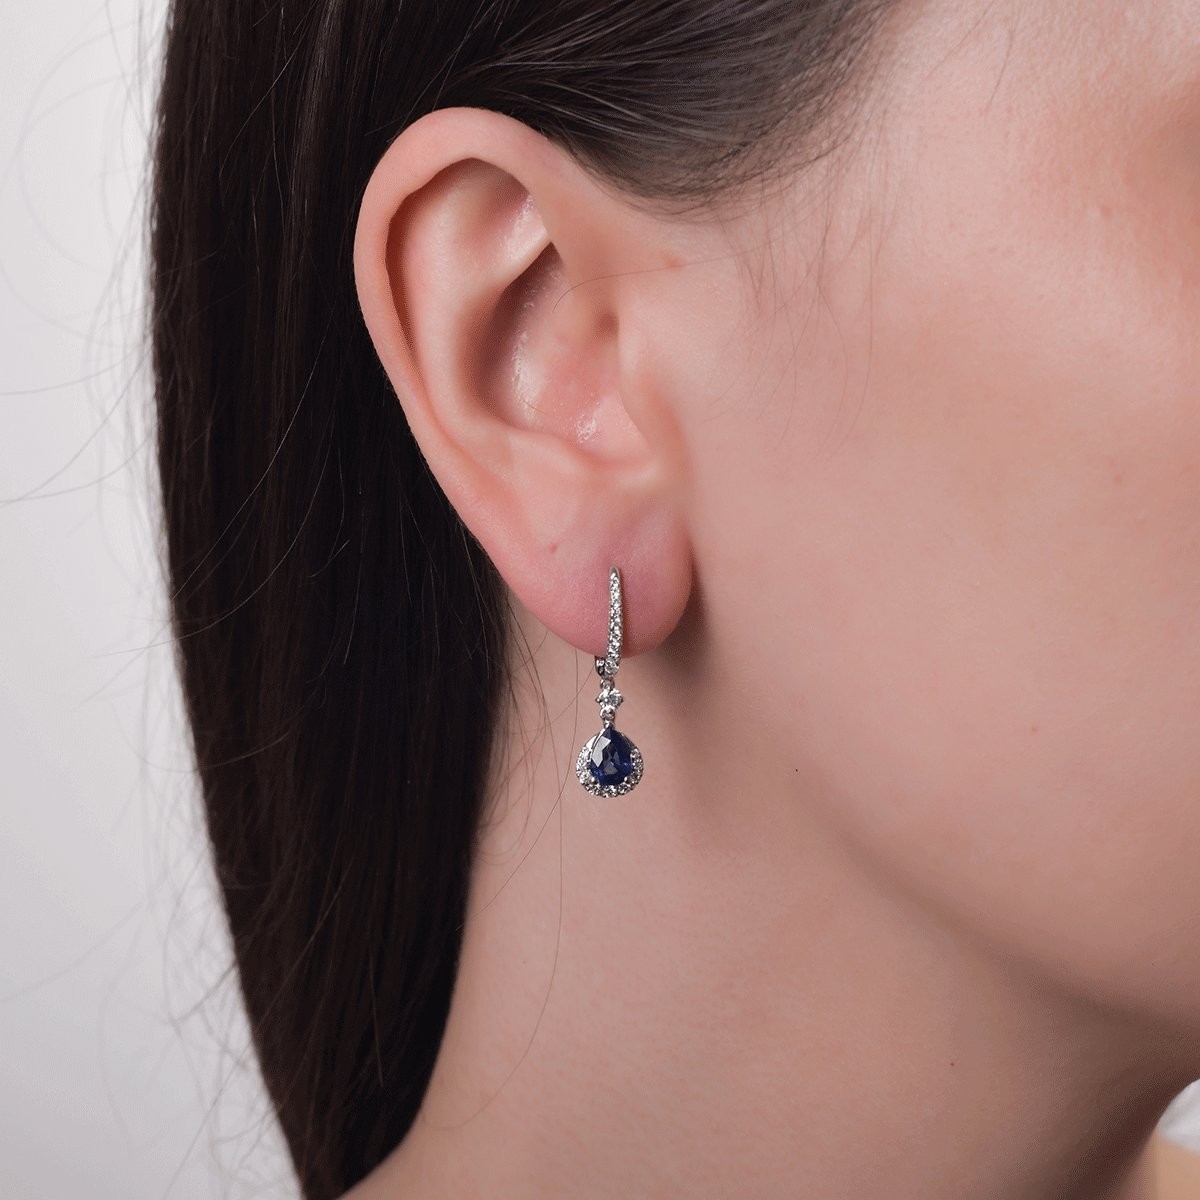 18K white gold earrings with 1.47ct sapphires and 0.44ct diamonds